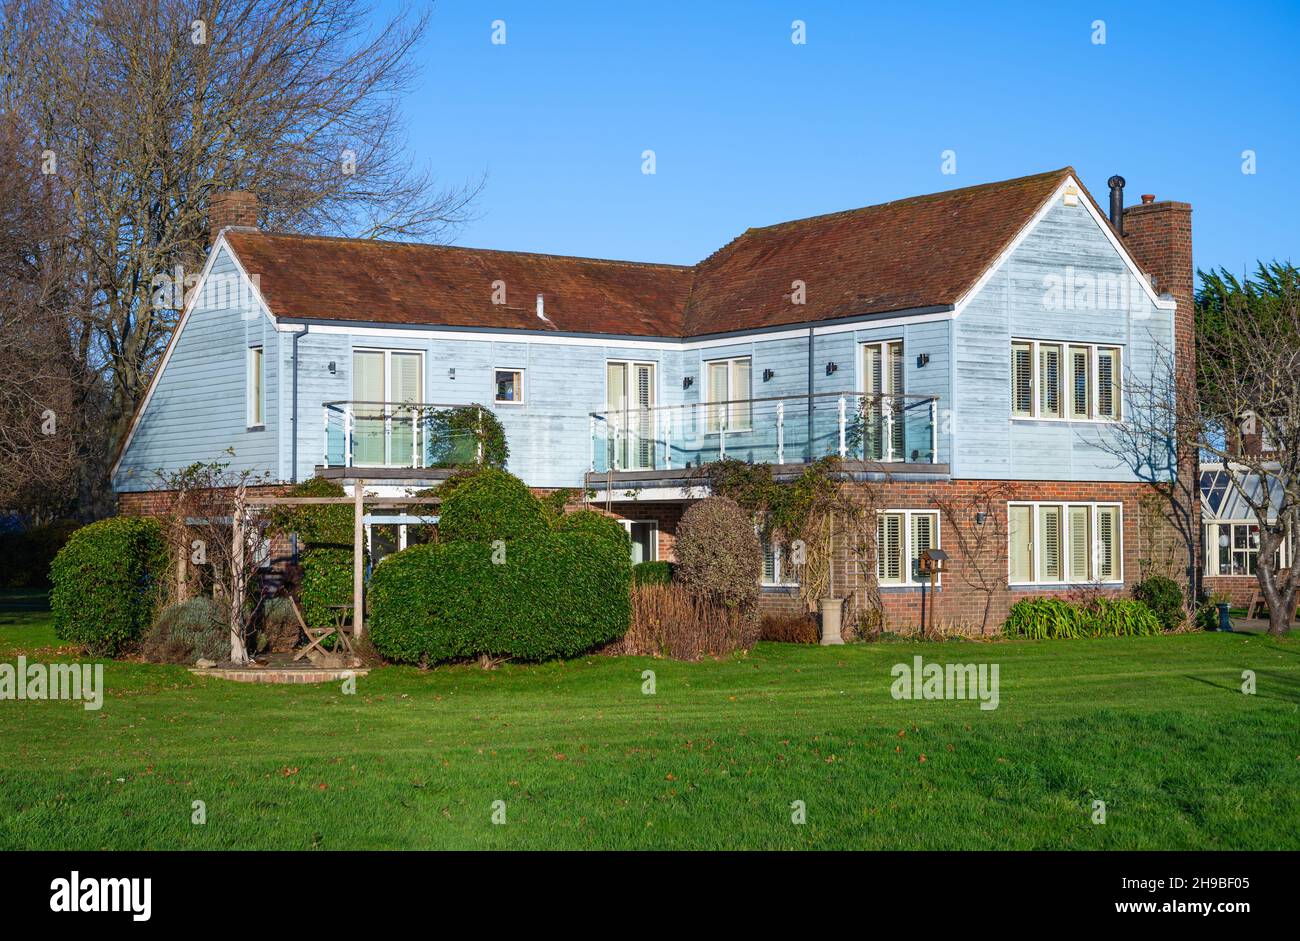 Meadow House on Canute Road (view shown is from Shore Road), a waterfront property with large front garden in Bosham Village, West Sussex, England, UK Stock Photo